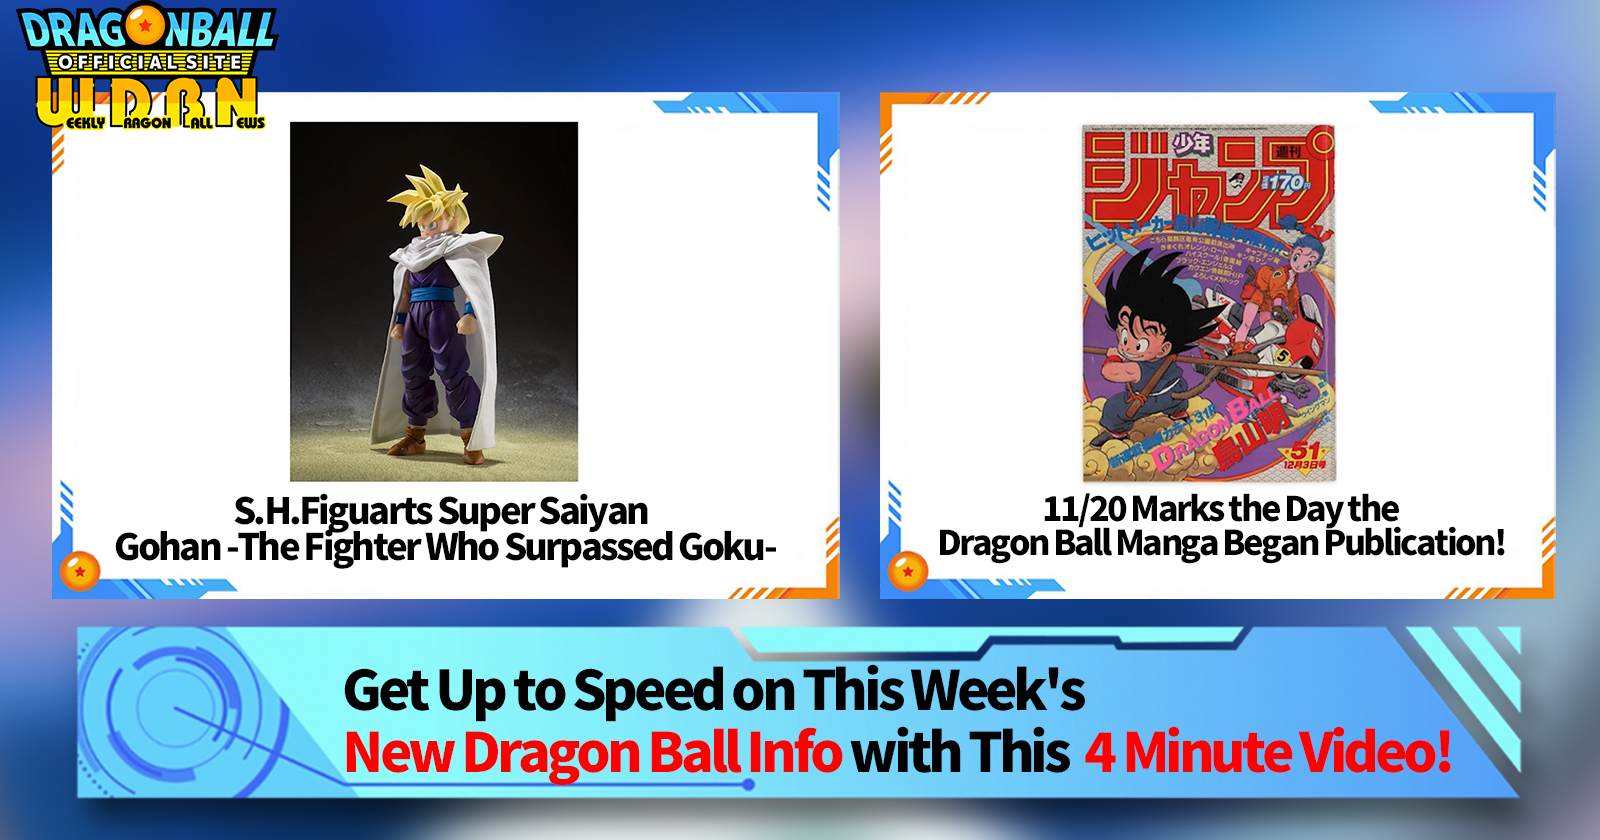 ABOUT  DRAGONBALL OFFICIAL SITE